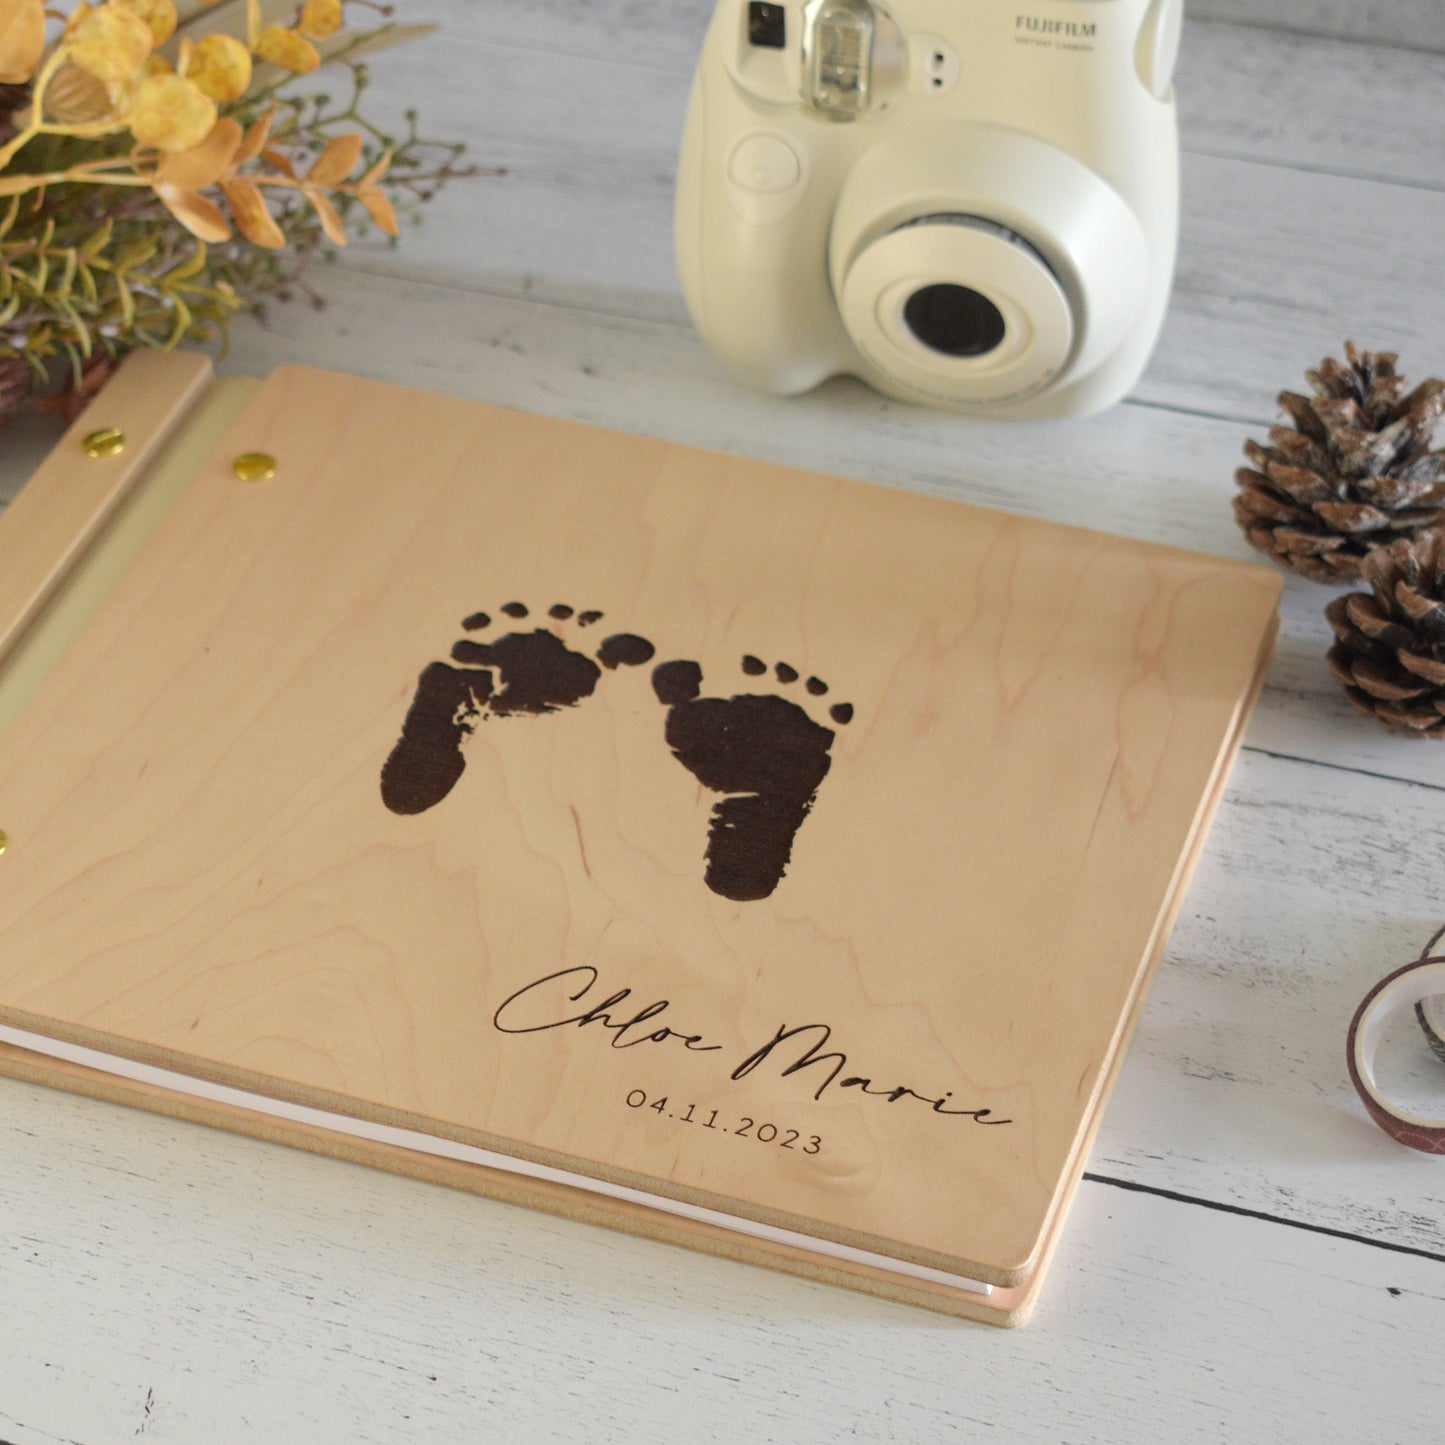 An 8.5x11" guest book lies on a table. Made of maple wood, ivory vegan leather binding, and gold hardware. The front cover has engraved baby foot prints with the words Chloe Marie 04.11.2023.